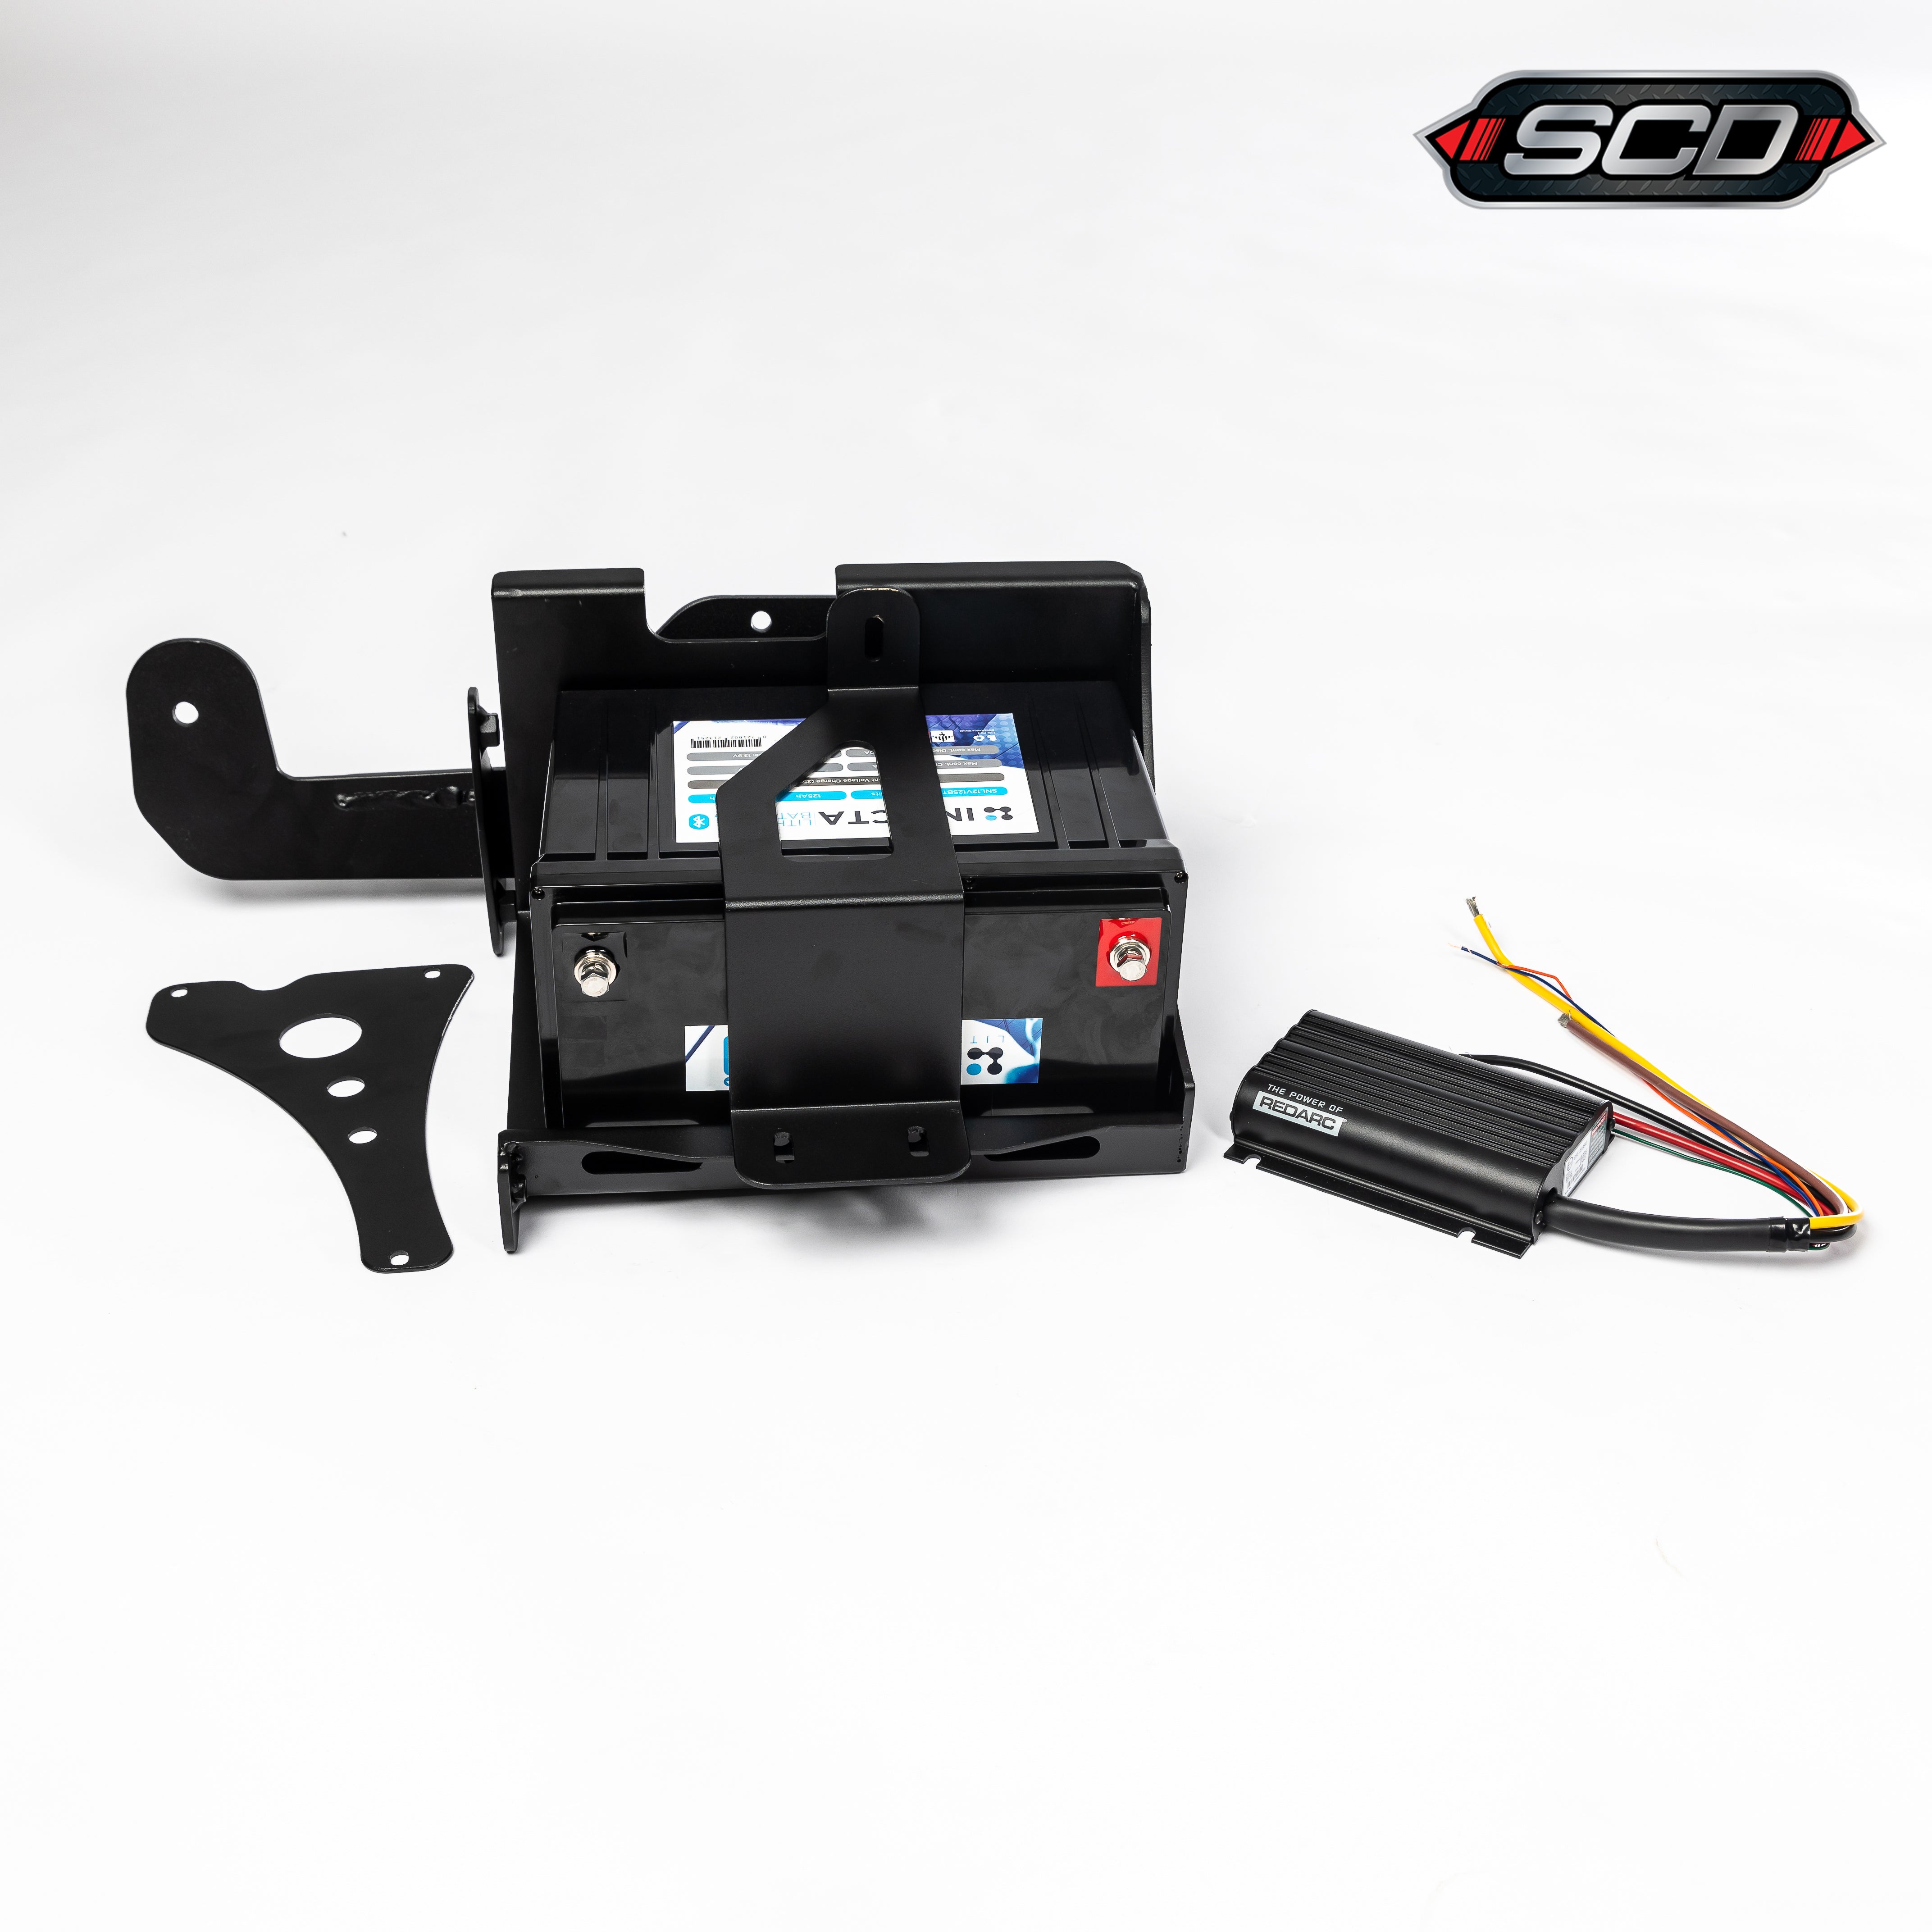 RAM 1500 DT Auxiliary Battery System